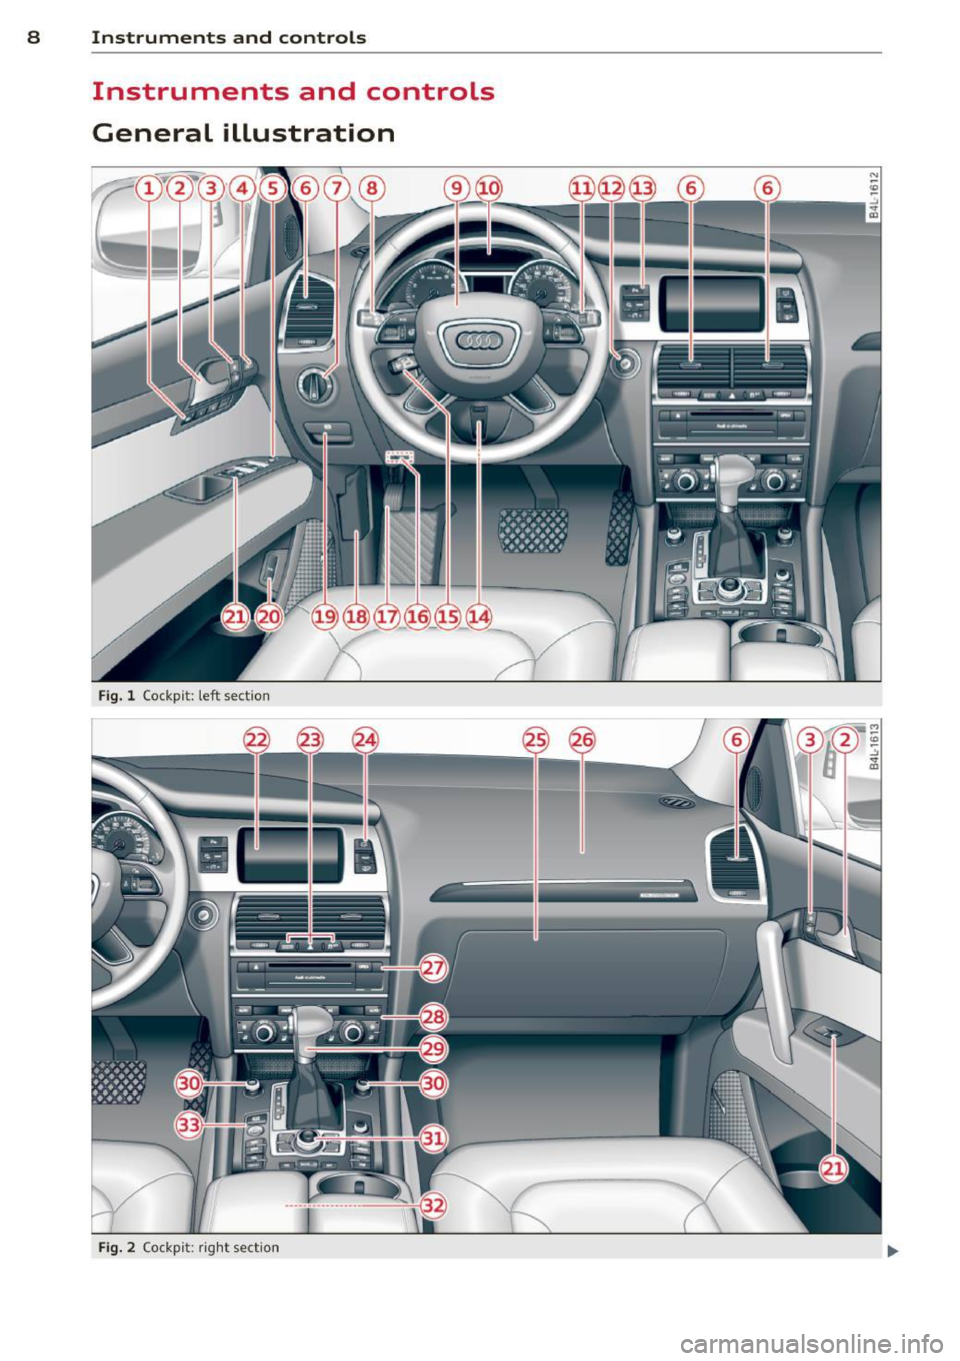 AUDI Q7 2014  Owner´s Manual 8  Instruments and controls 
Instruments  and  controls 
General  illustration 
Fig. l Cockp it:  left  sect io n 
-----
-----
----- ---
- - -- - -
~ --------
~ -,~ ---~ -·-c-•-
Fig. 2 Cock pi t: r